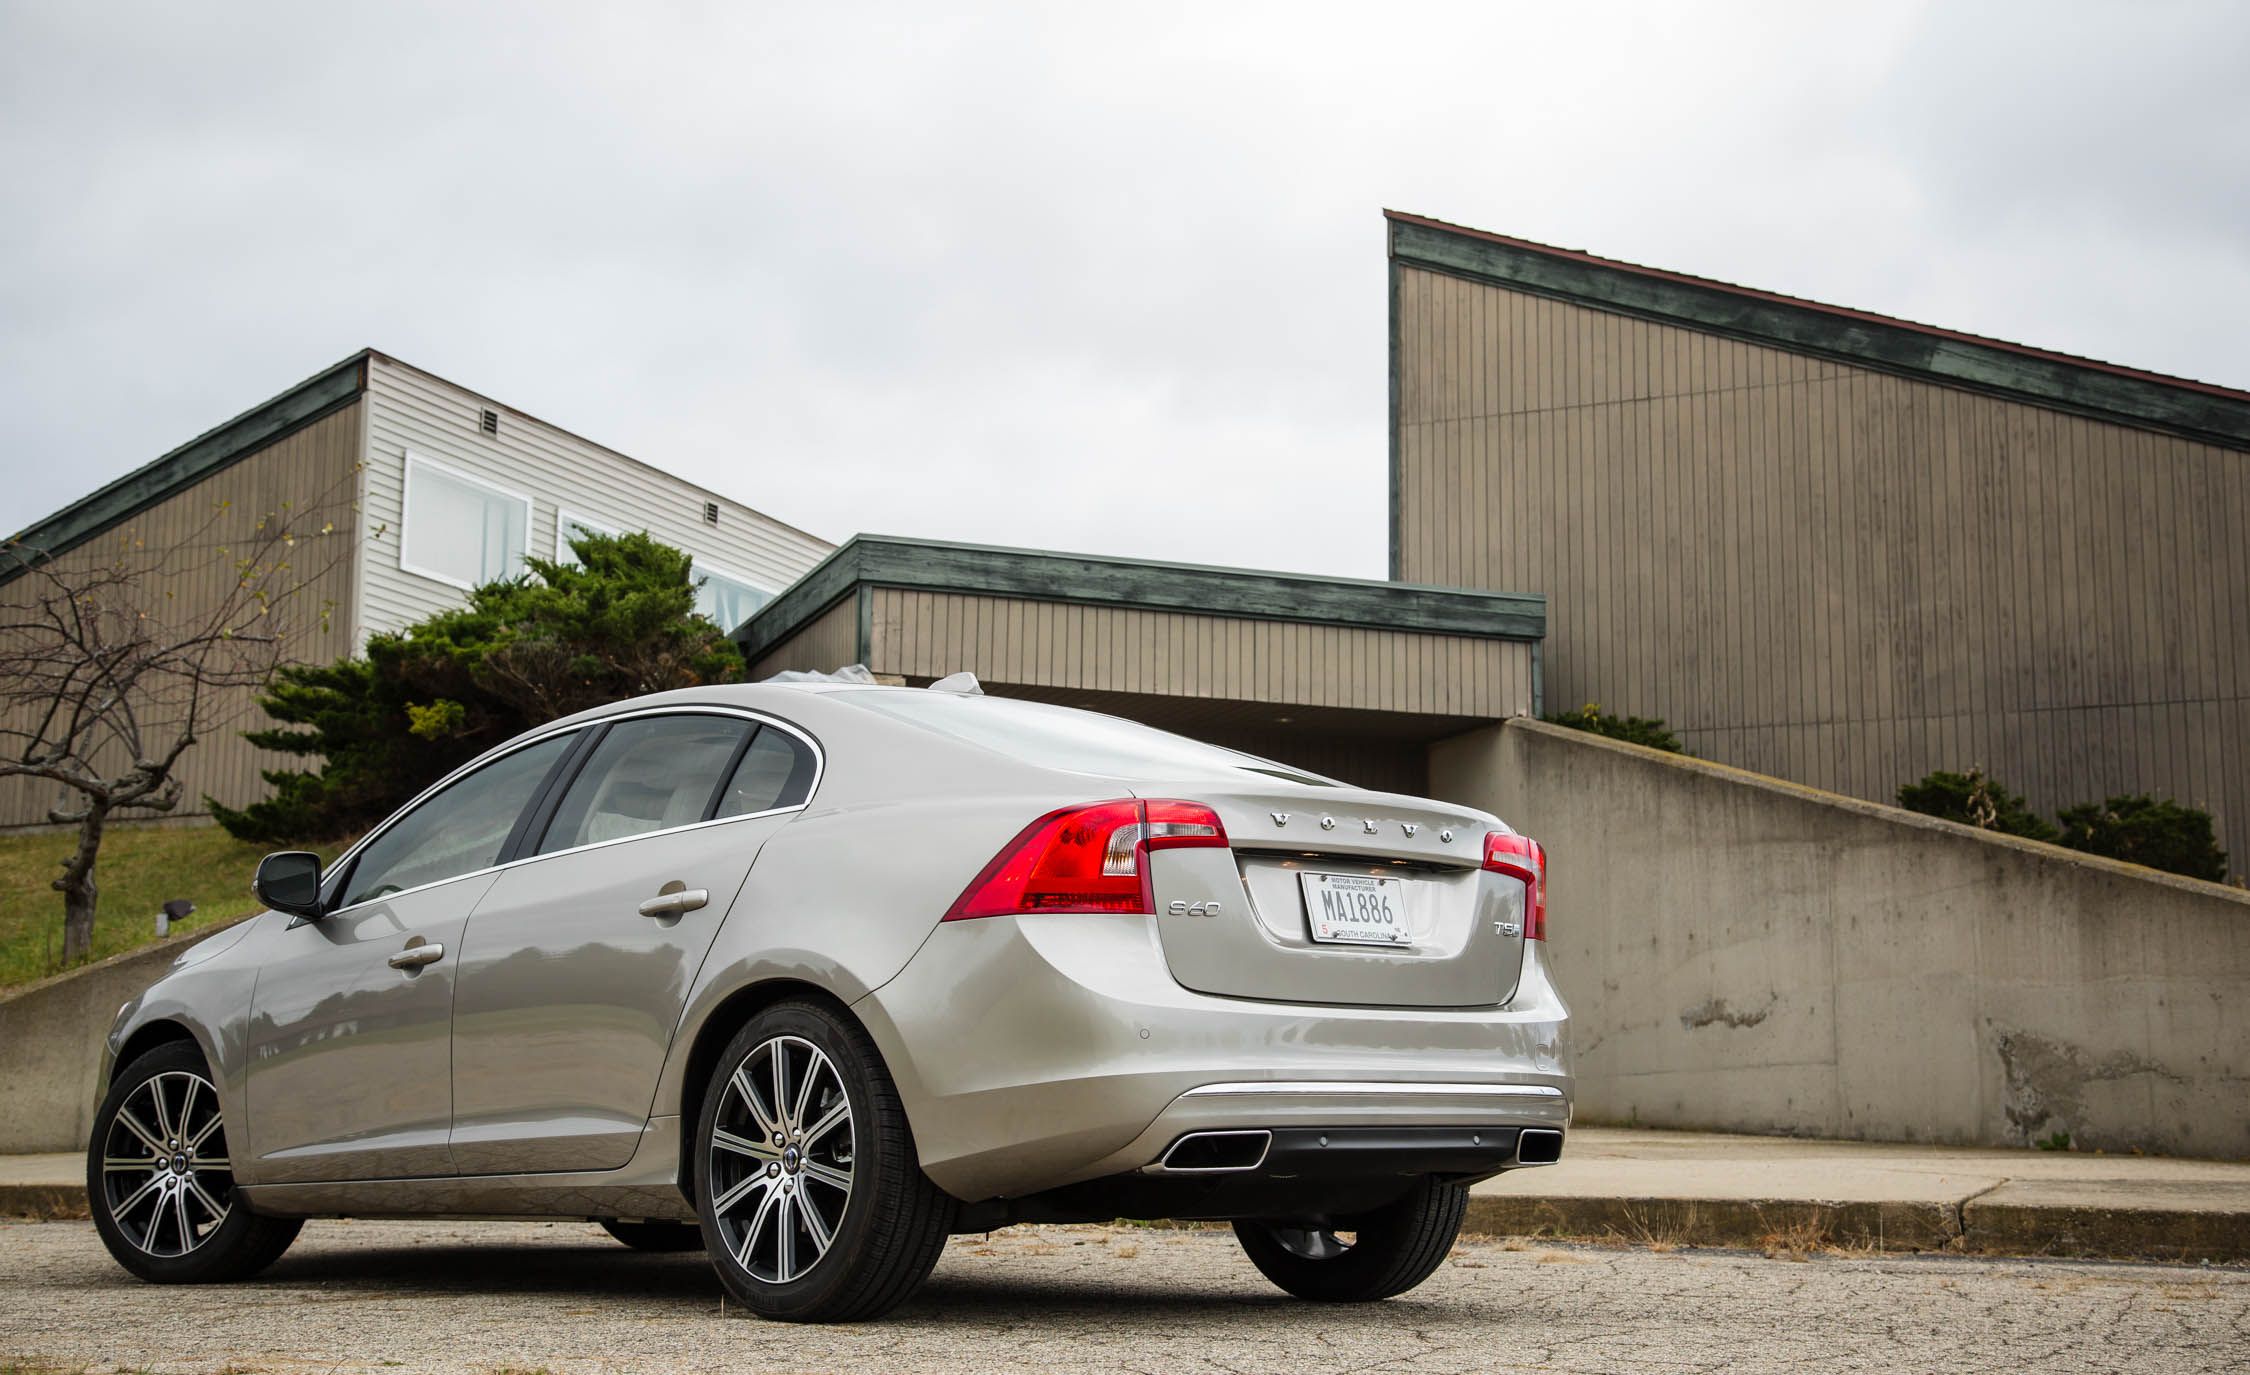 2016 Volvo S60 T5 Inscription Exterior Full Rear And Side (View 16 of 28)